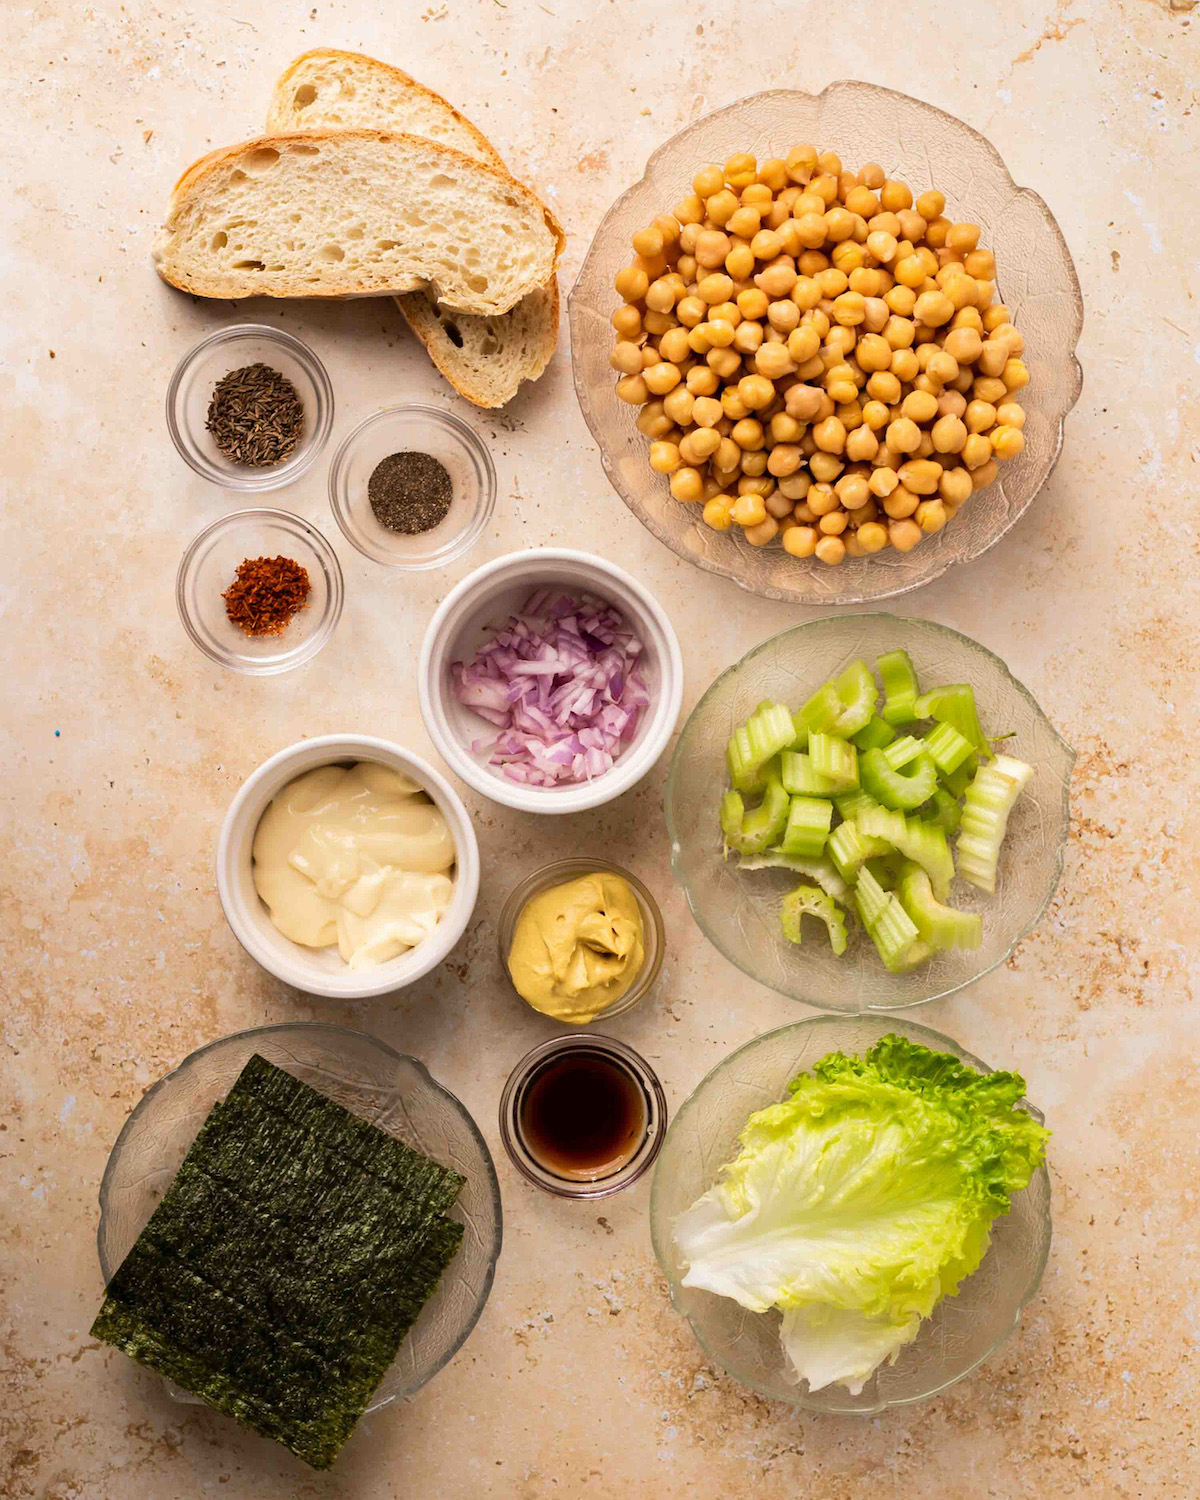 All of the ingredients for chickpea tuna salad on the counter.